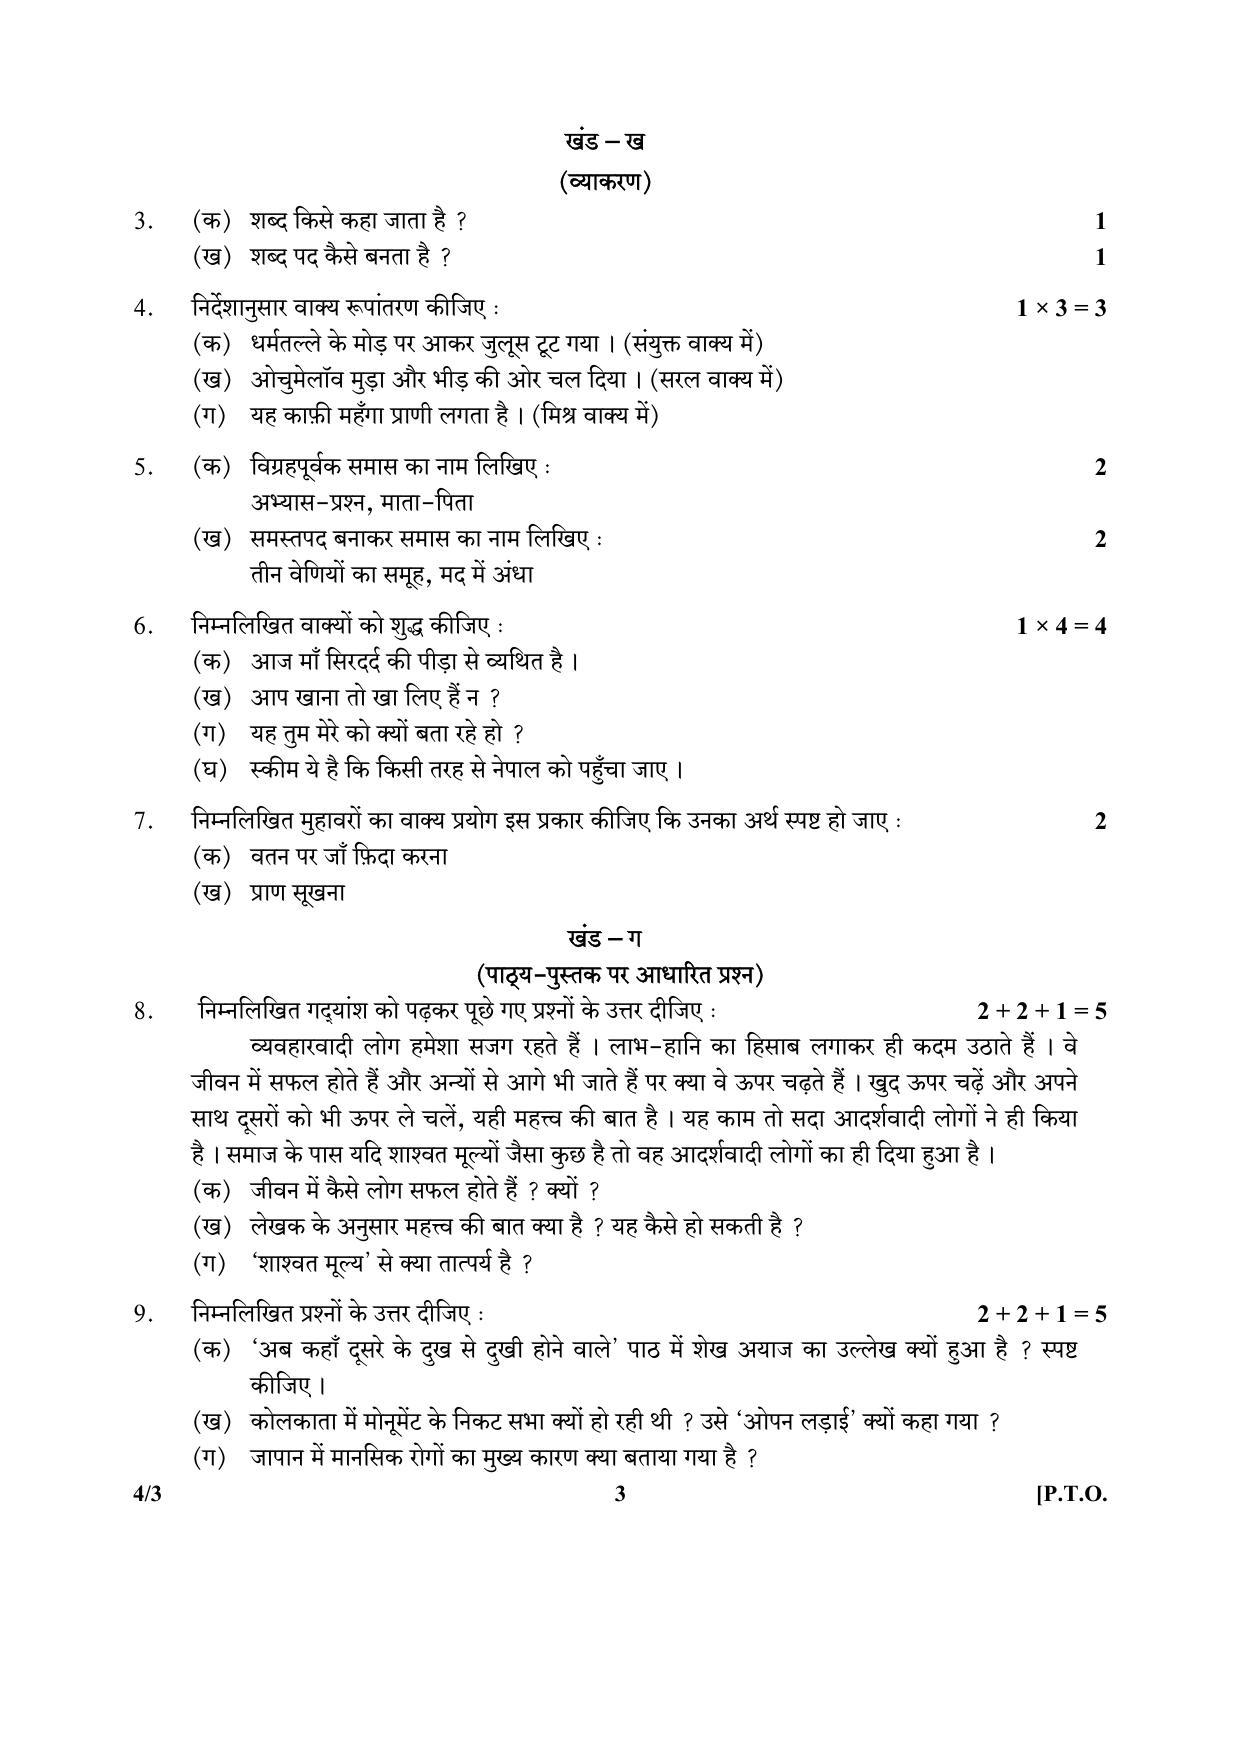 CBSE Class 10 4-3_Hindi 2017-comptt Question Paper - Page 3